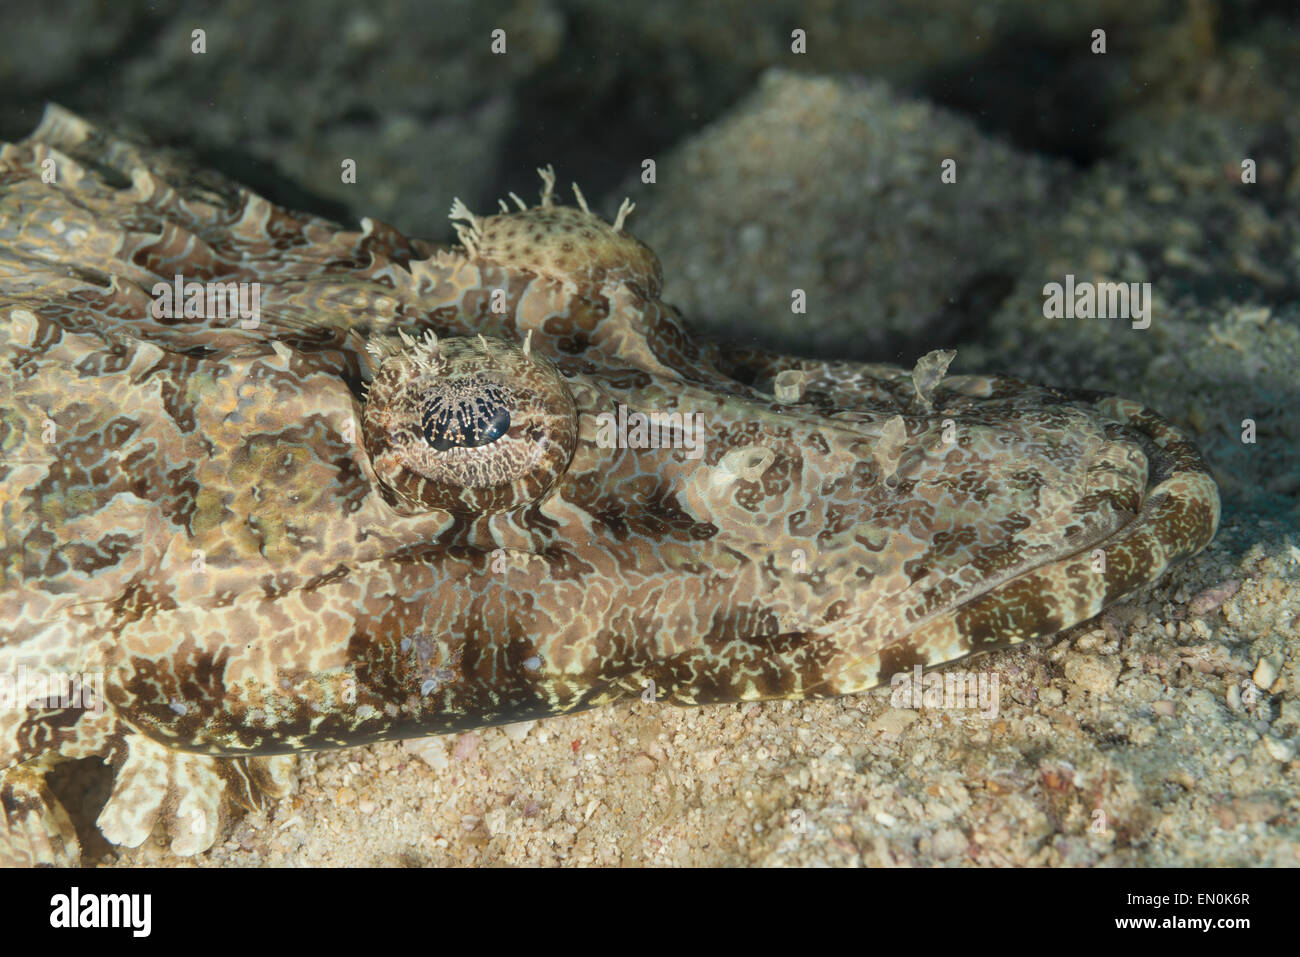 Crocodile fish camouflaged in its environment Stock Photo